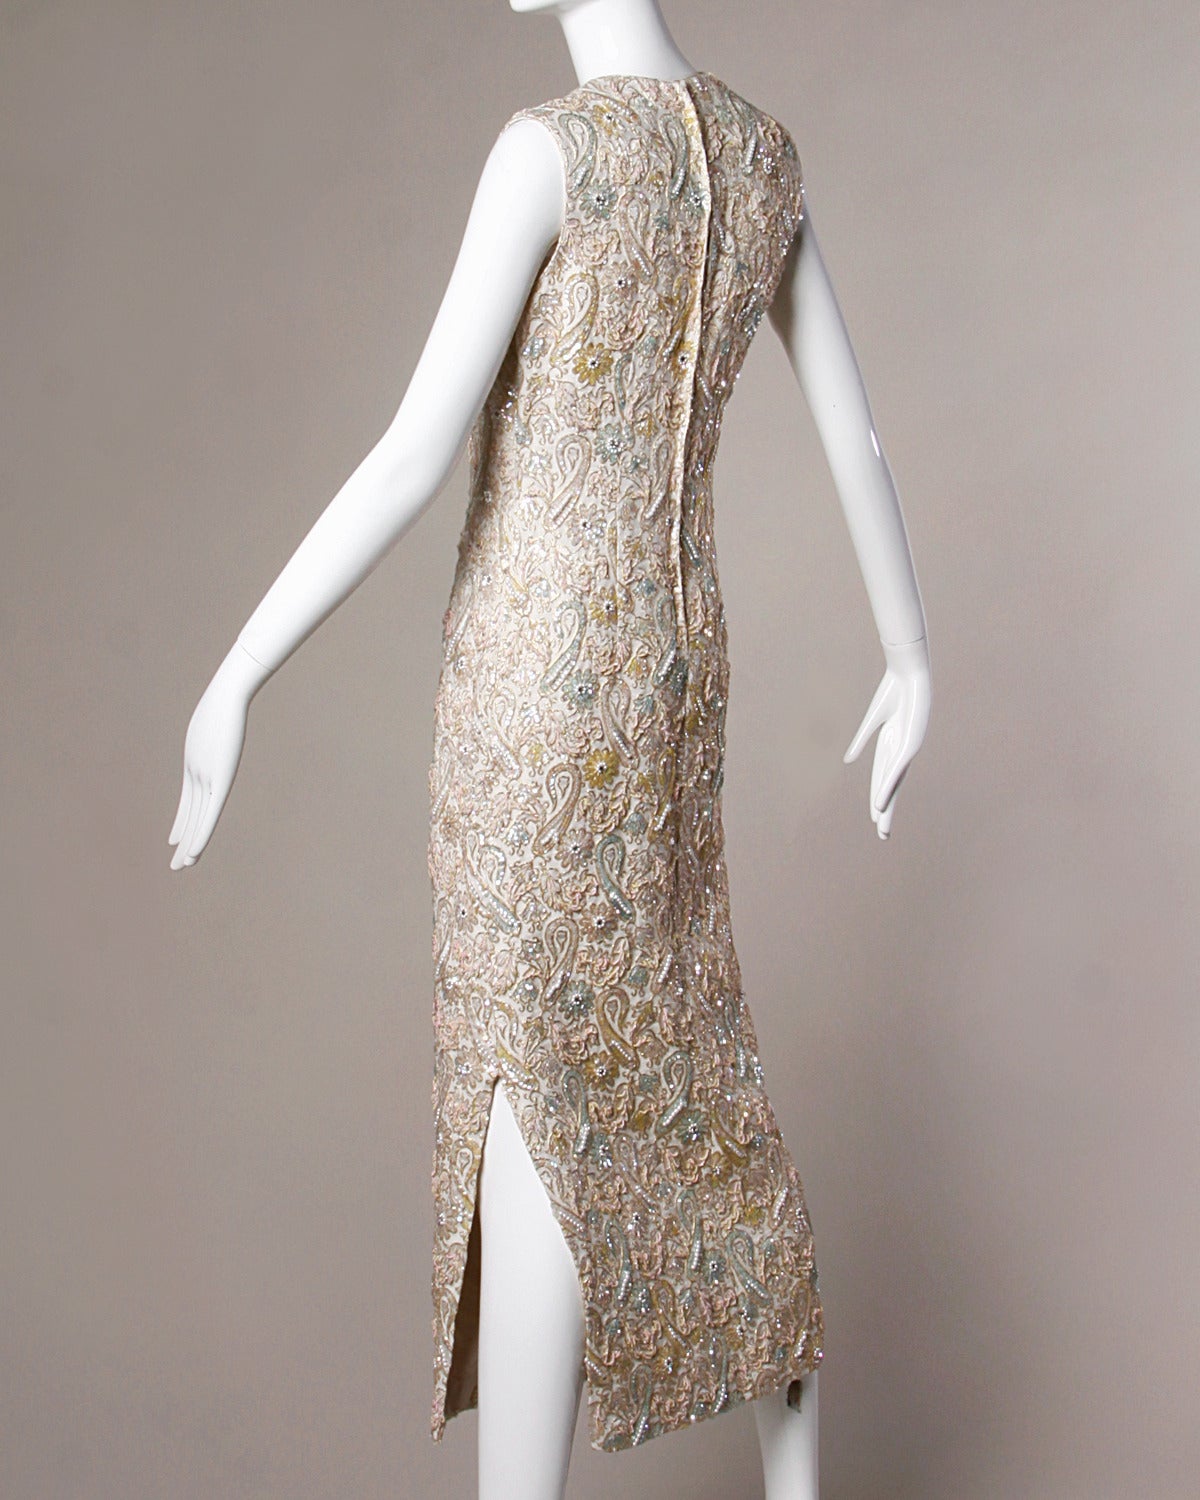 Women's Vintage 1960s Sequin, Beaded + Embroidered Heavily Embellished Maxi Dress